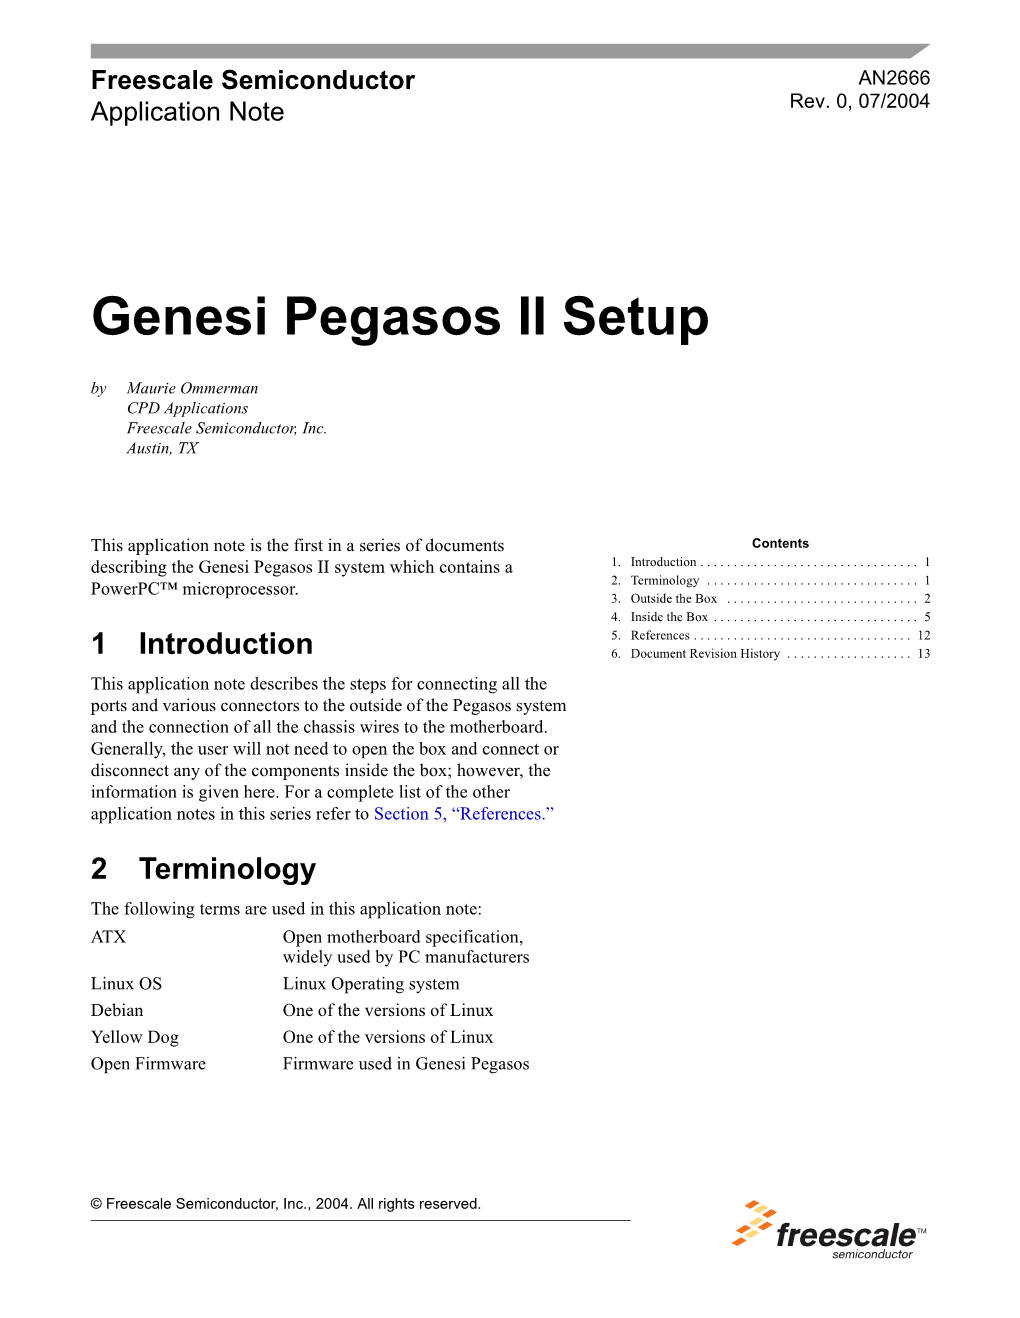 Genesi Pegasos II Setup by Maurie Ommerman CPD Applications Freescale Semiconductor, Inc